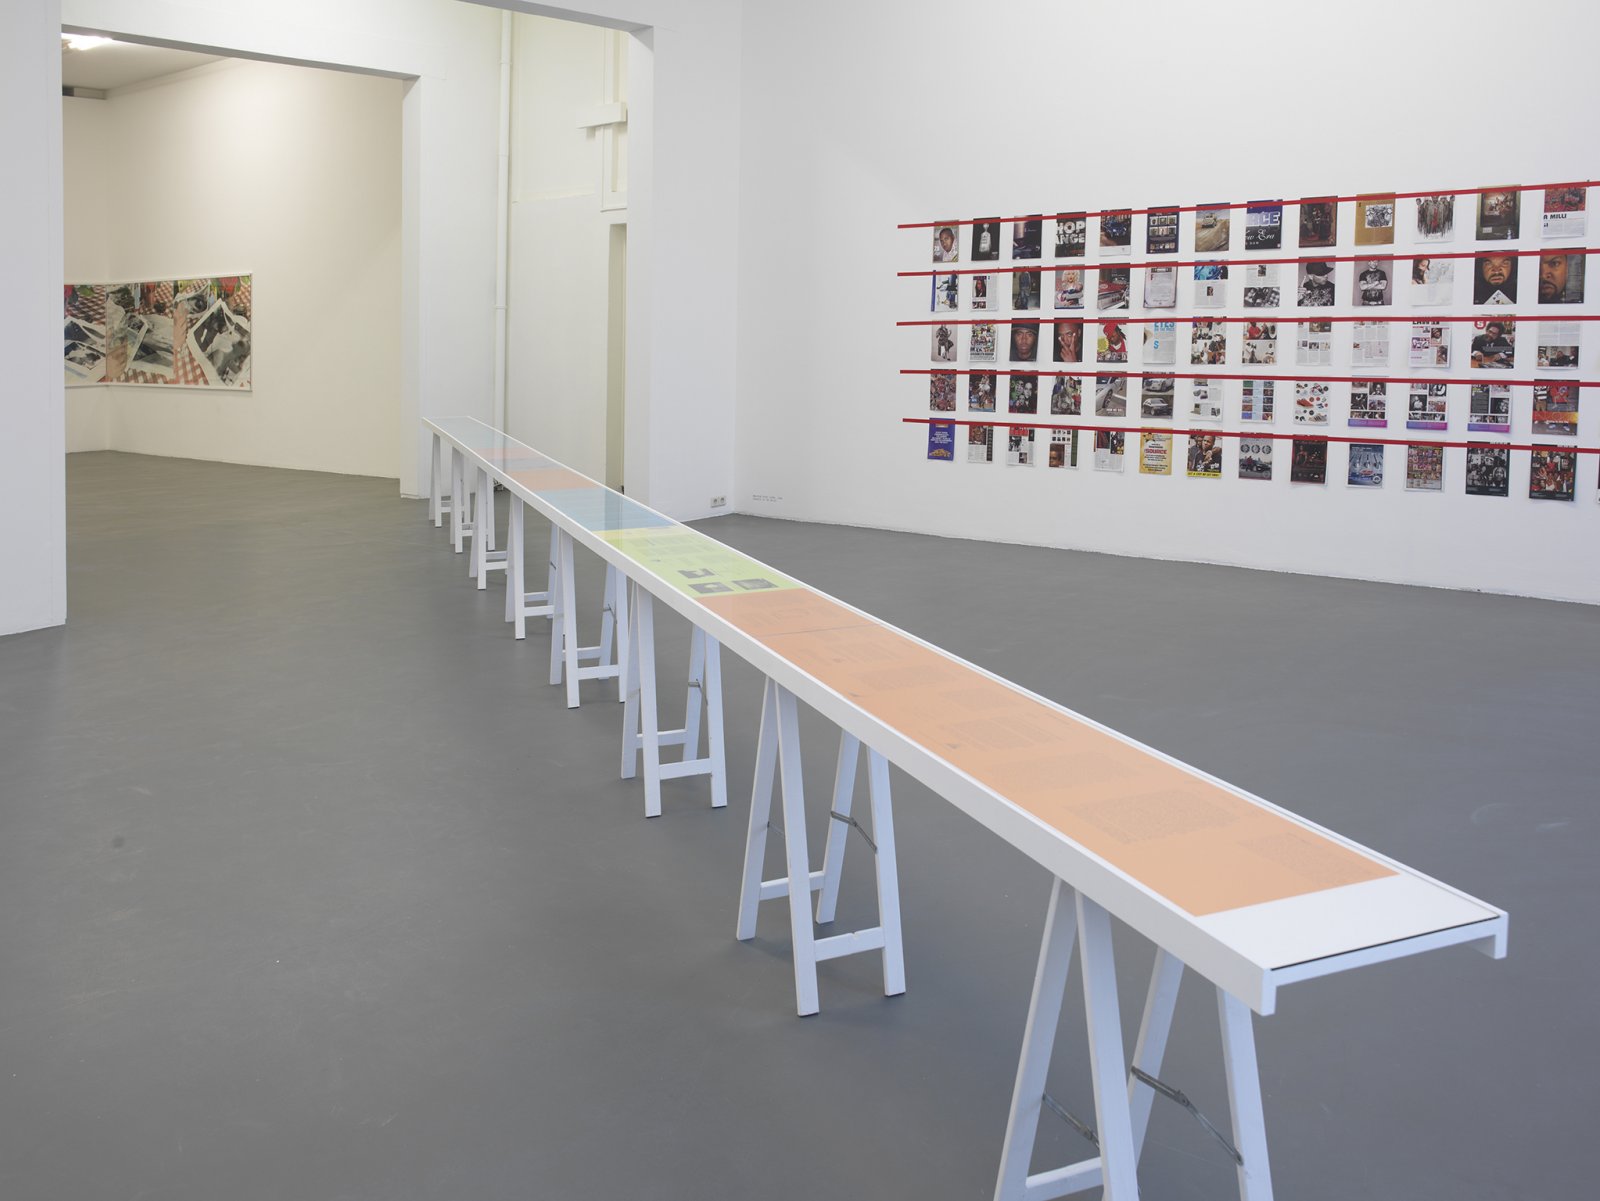 ​​Ian Wallace, installation view, A Literature of Images, Witte de With, Rotterdam, 2008​​ by Ian Wallace